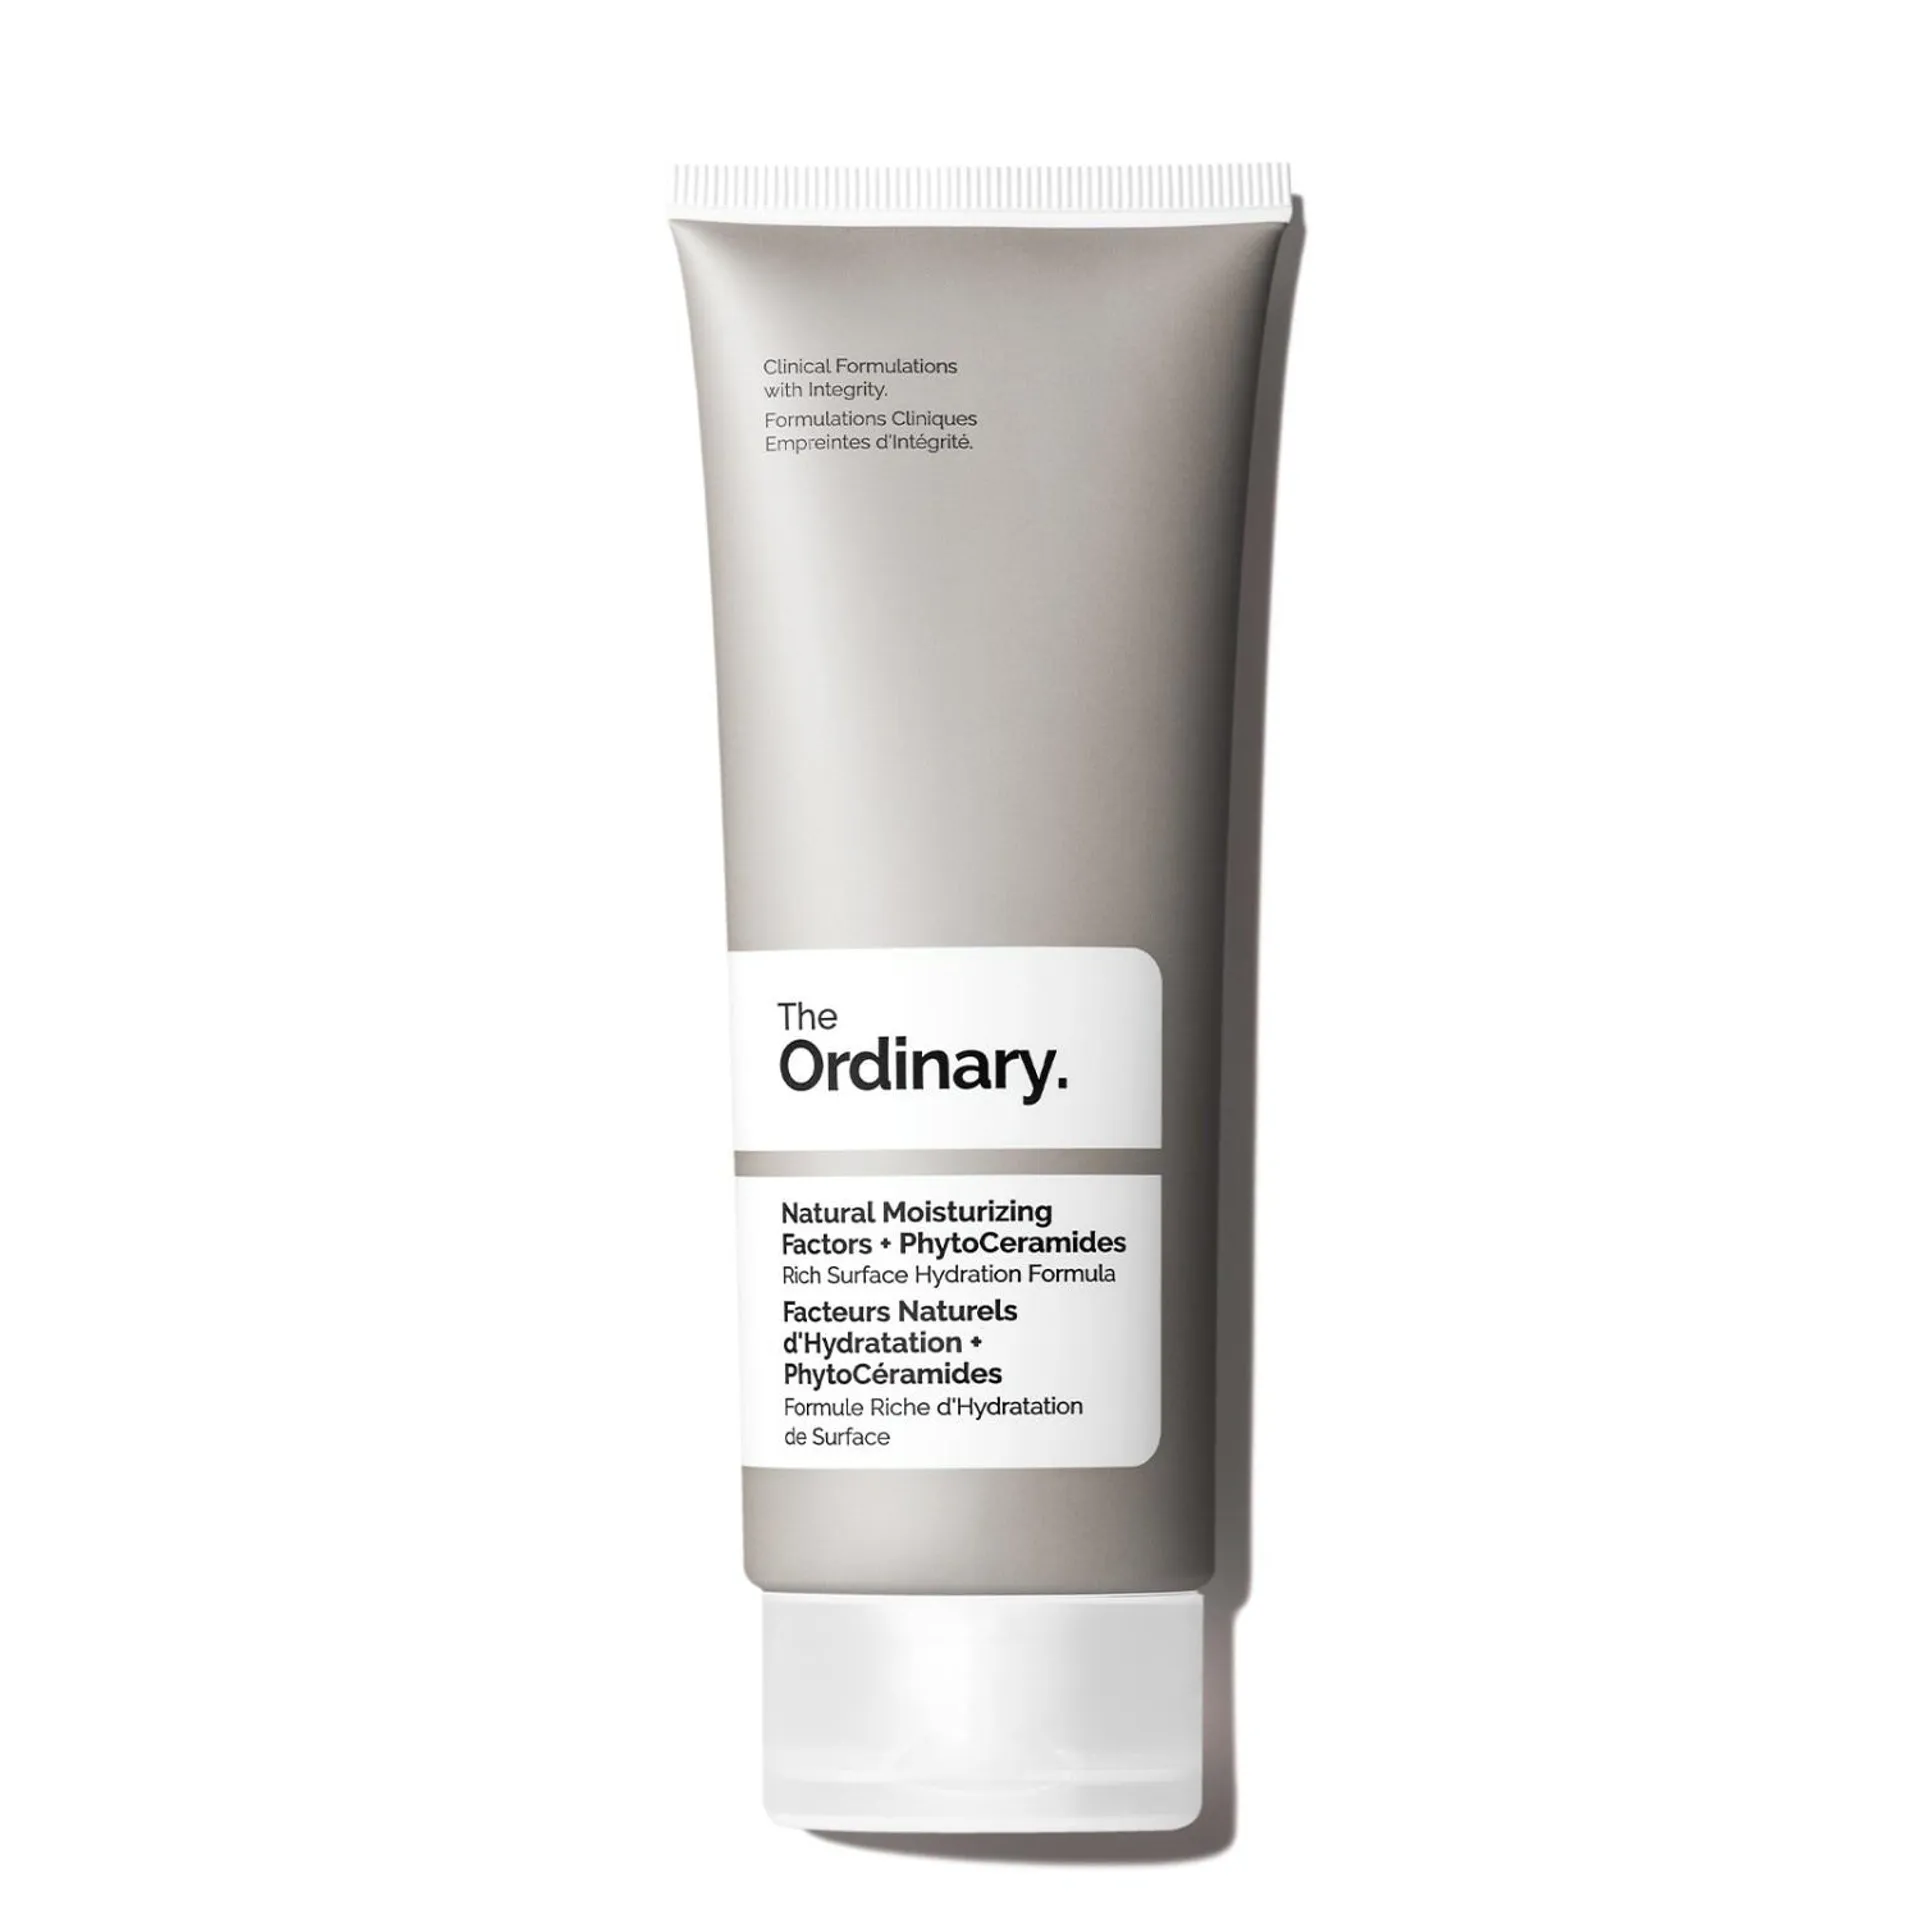 The Ordinary Hydration Natural Moisturizing Factors and PhytoCeramides